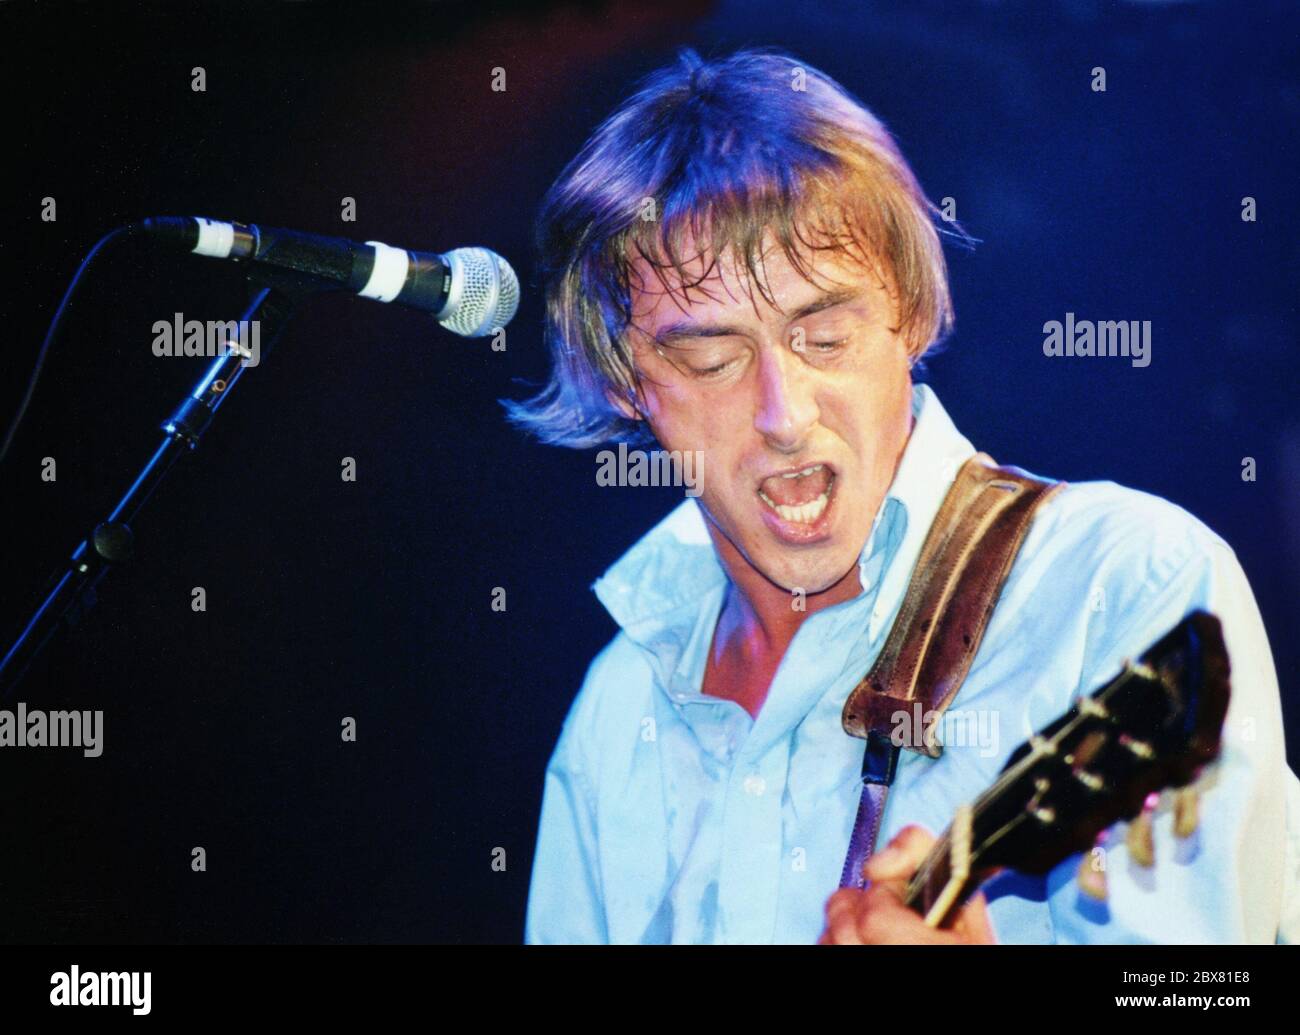 05 June 2020 - British rock icon Paul Weller (The Jam and The Style  Council) has announced a new album titled 'On Sunset' release for June  2020. File Photo: Paul Weller performs